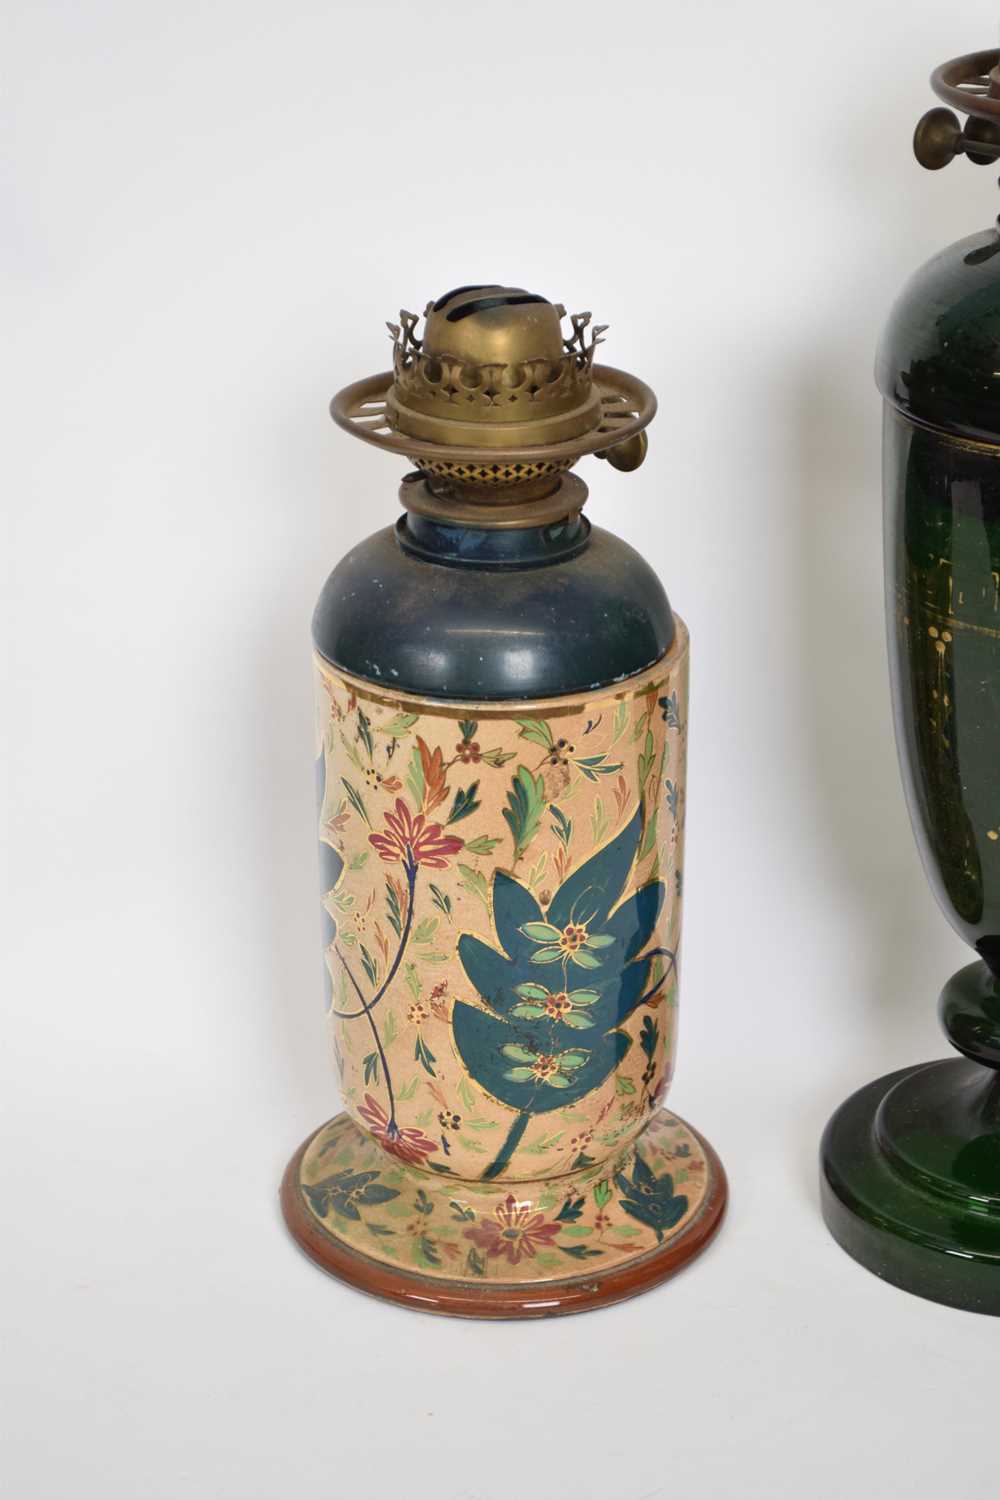 Two 19th century oil lamps, one green glass with gilt design (worn), the other with pottery base